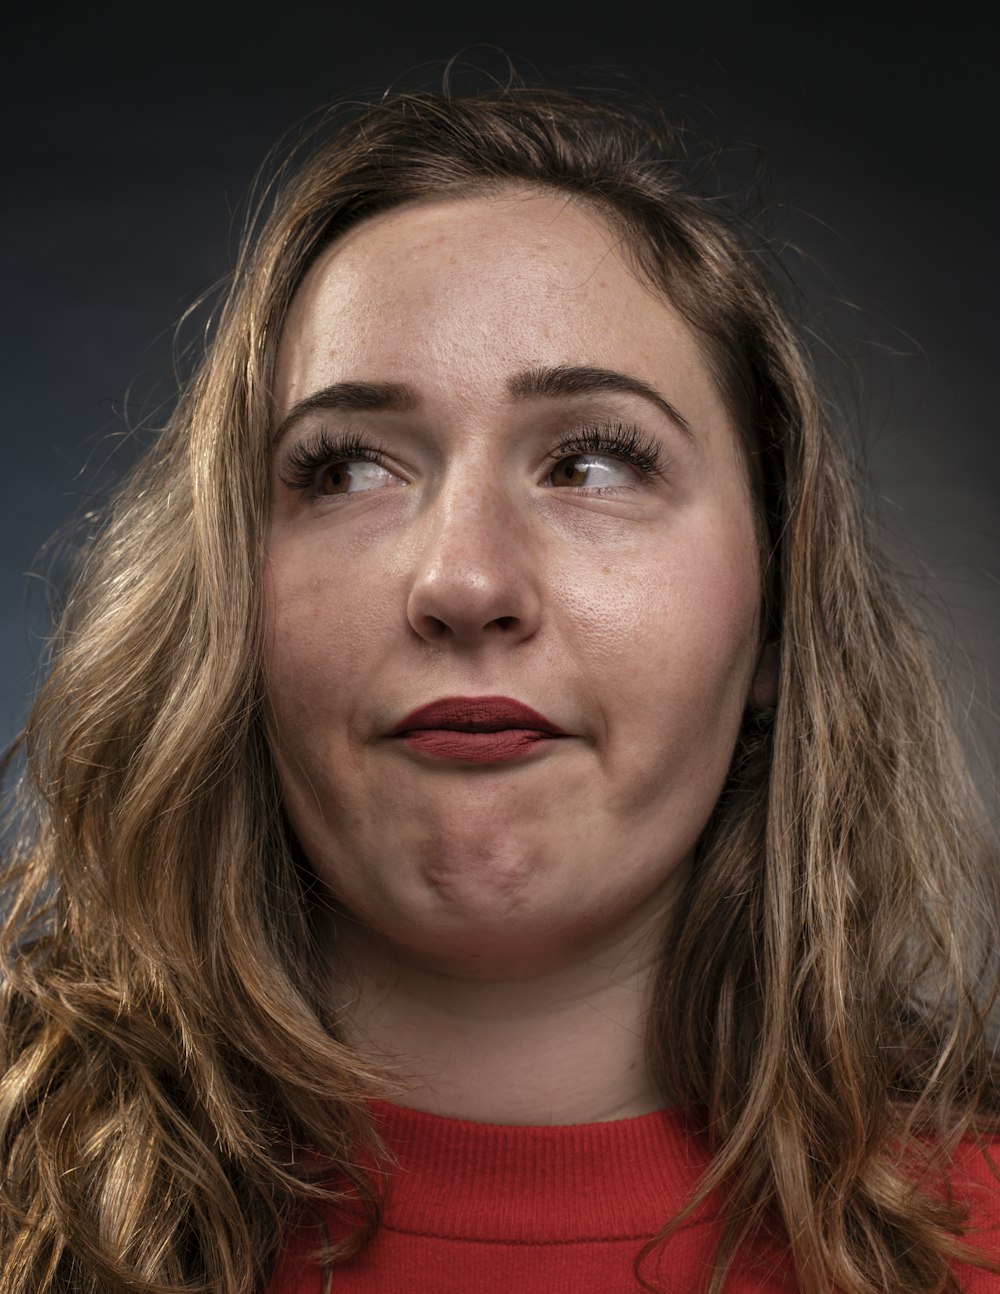 a close up of a person wearing a red shirt